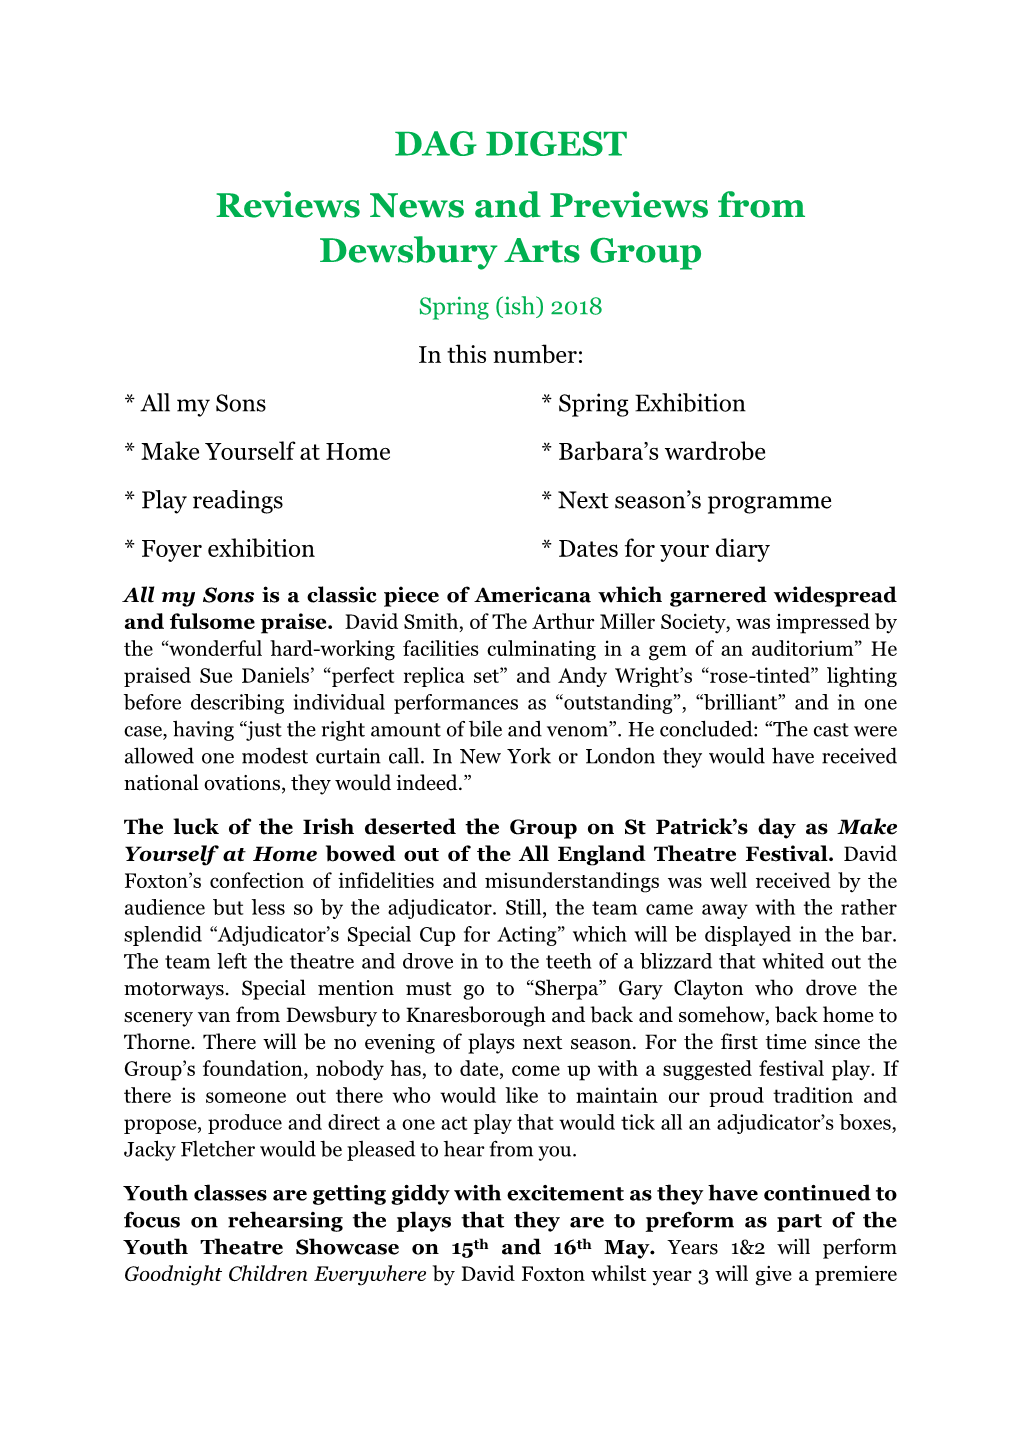 DAG DIGEST Reviews News and Previews from Dewsbury Arts Group